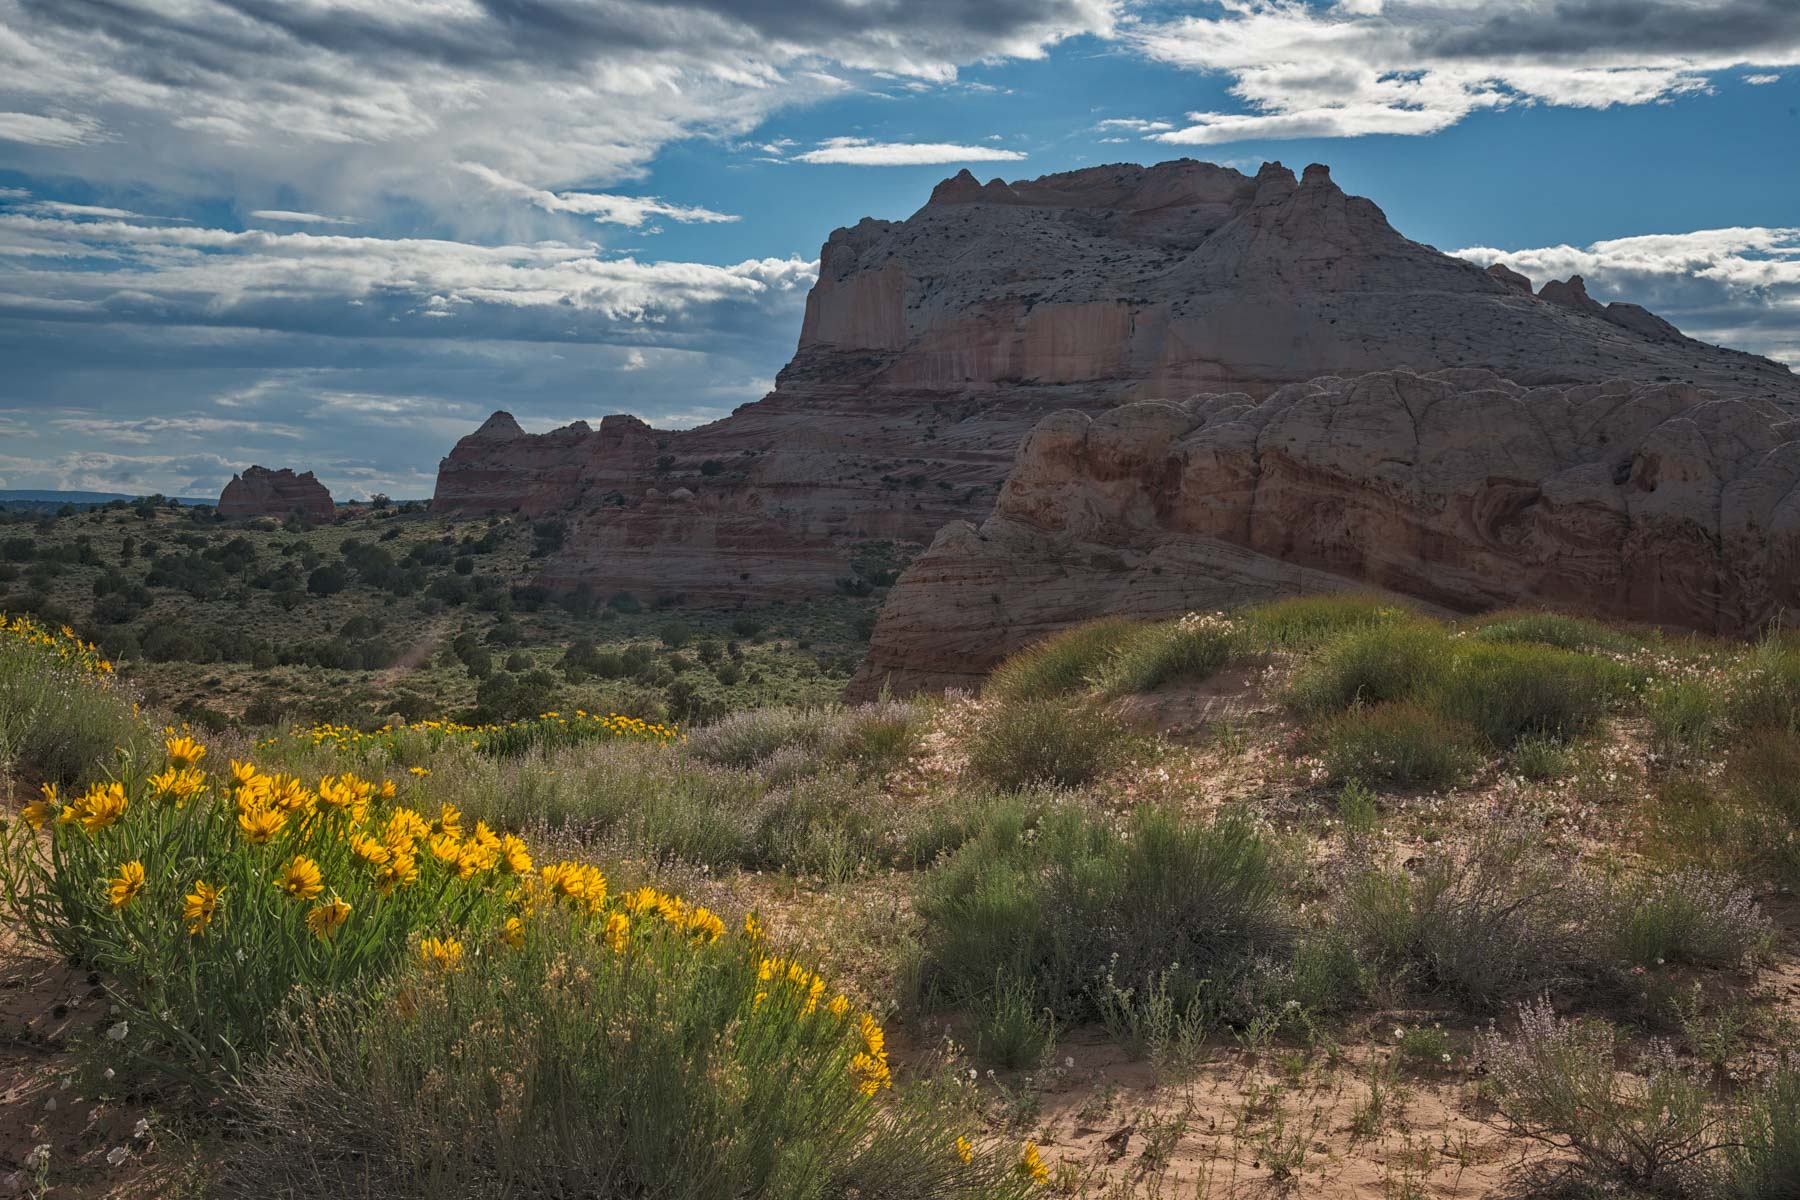 June Wildflowers and The Monolith at The White Pocket in Vermilion Cliffs National Monument